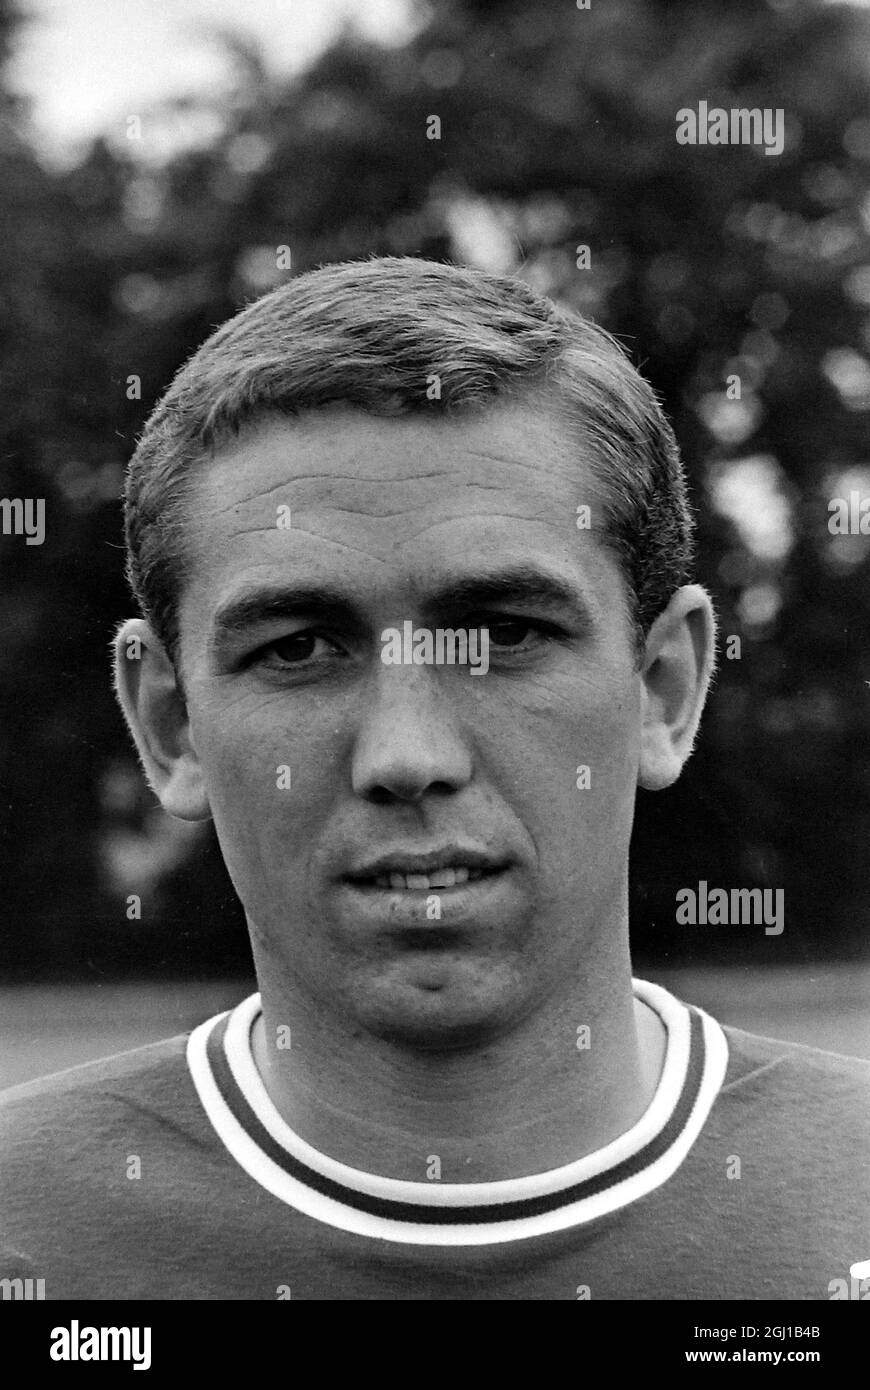 MARVIN HINTON - PORTRAIT OF FOOTBALLER OF CHELSEA FOOTBALL CLUB FC TEAM IN  LONDON / ; 26 JULY 1964 Stock Photo - Alamy